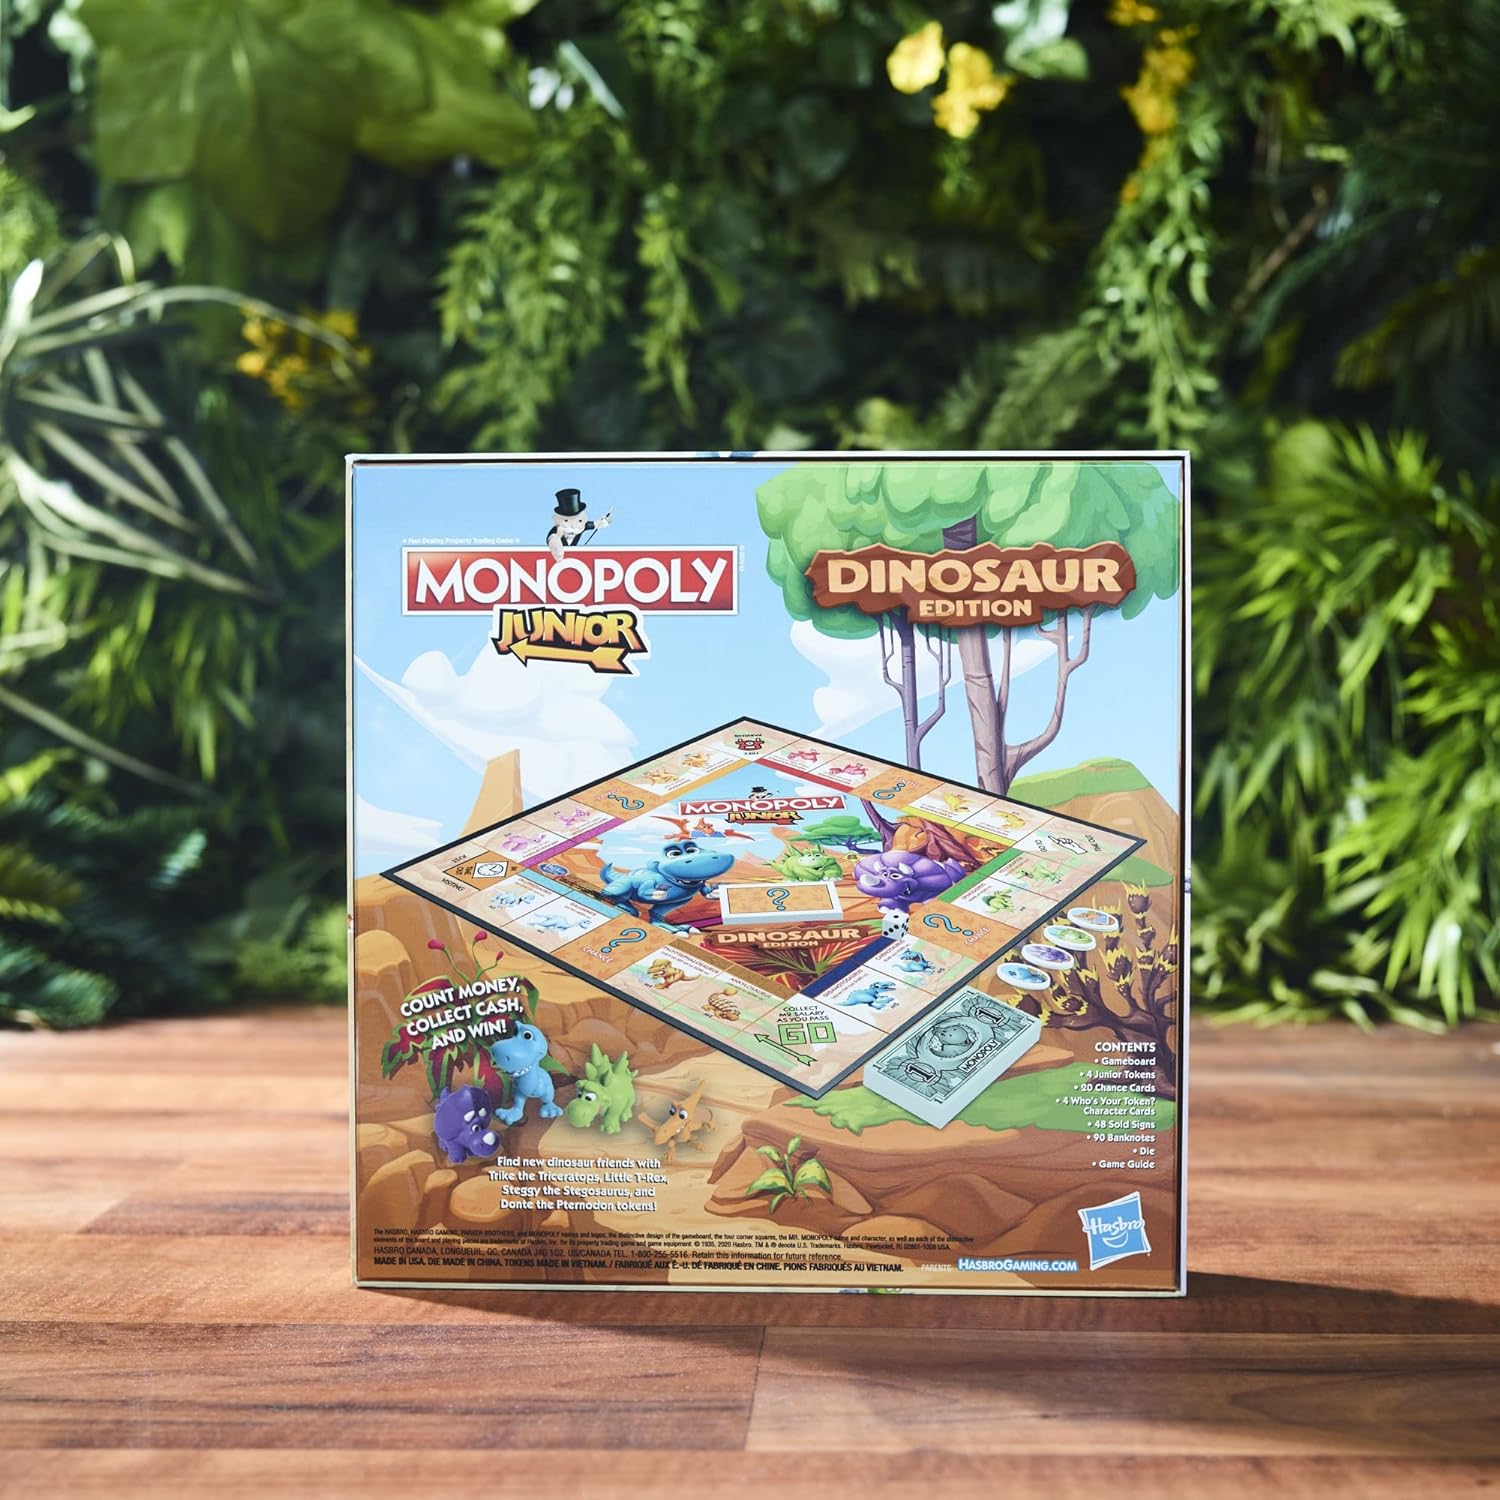 Read more about the article Hasbro Gaming Monopoly Junior Dinosaur Edition Board Game Review